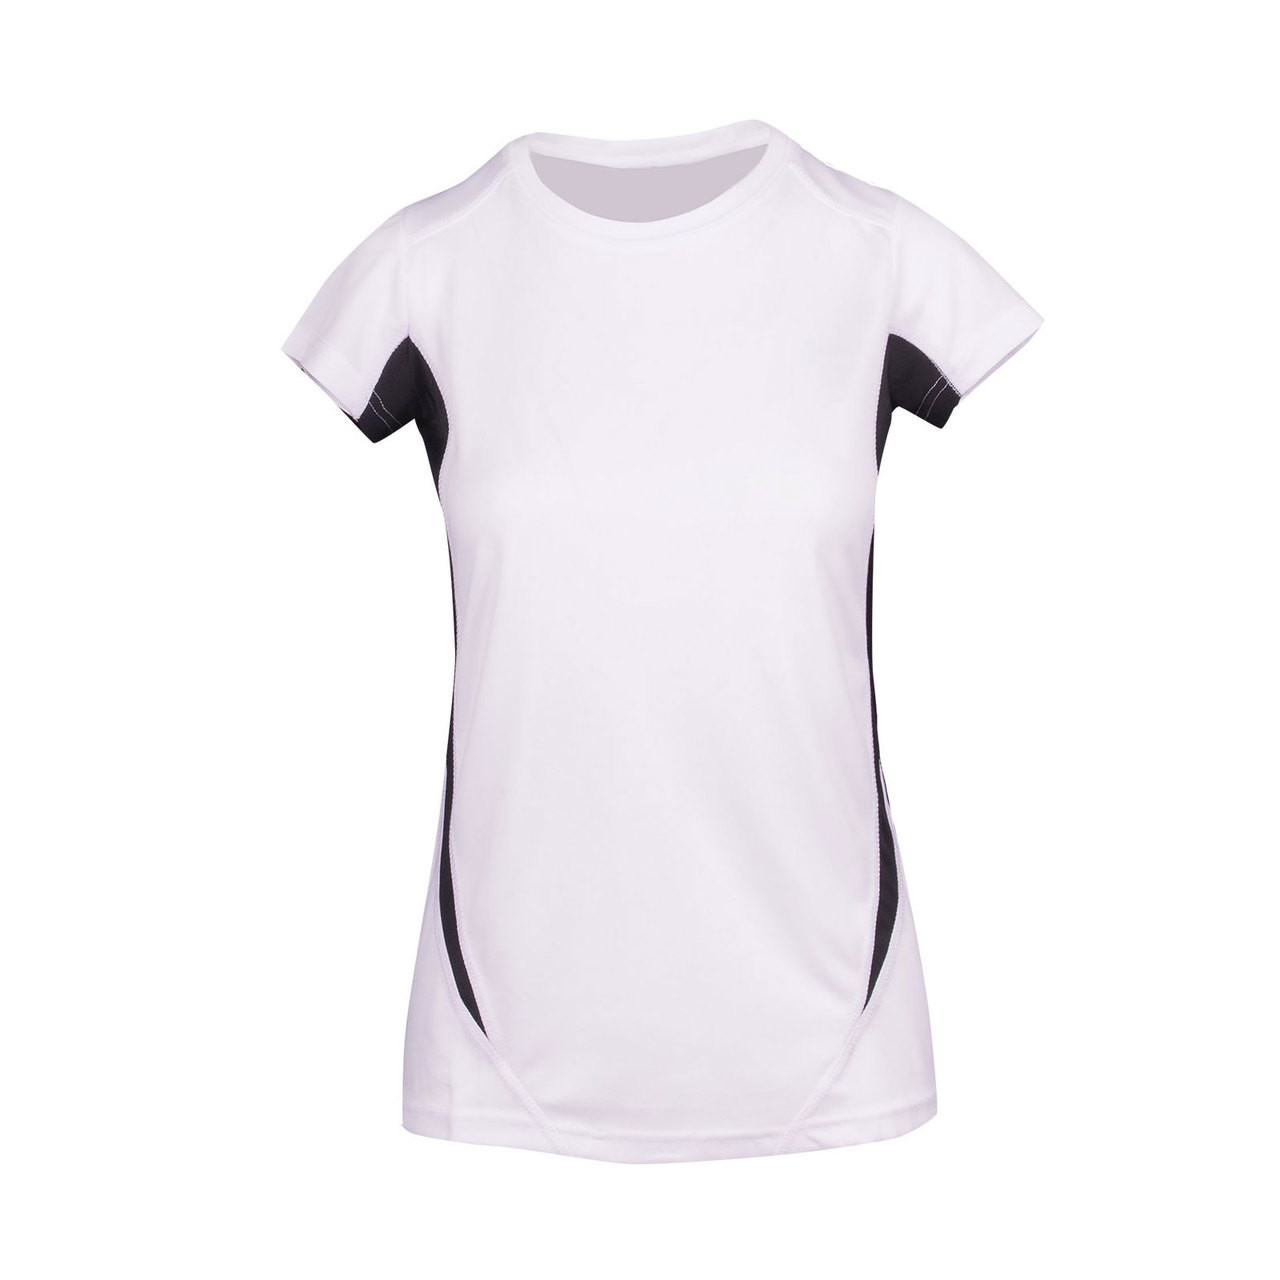 Blank Womens Quick Dry Contrast Tshirts | Shop Wholesale Blank Sports ...